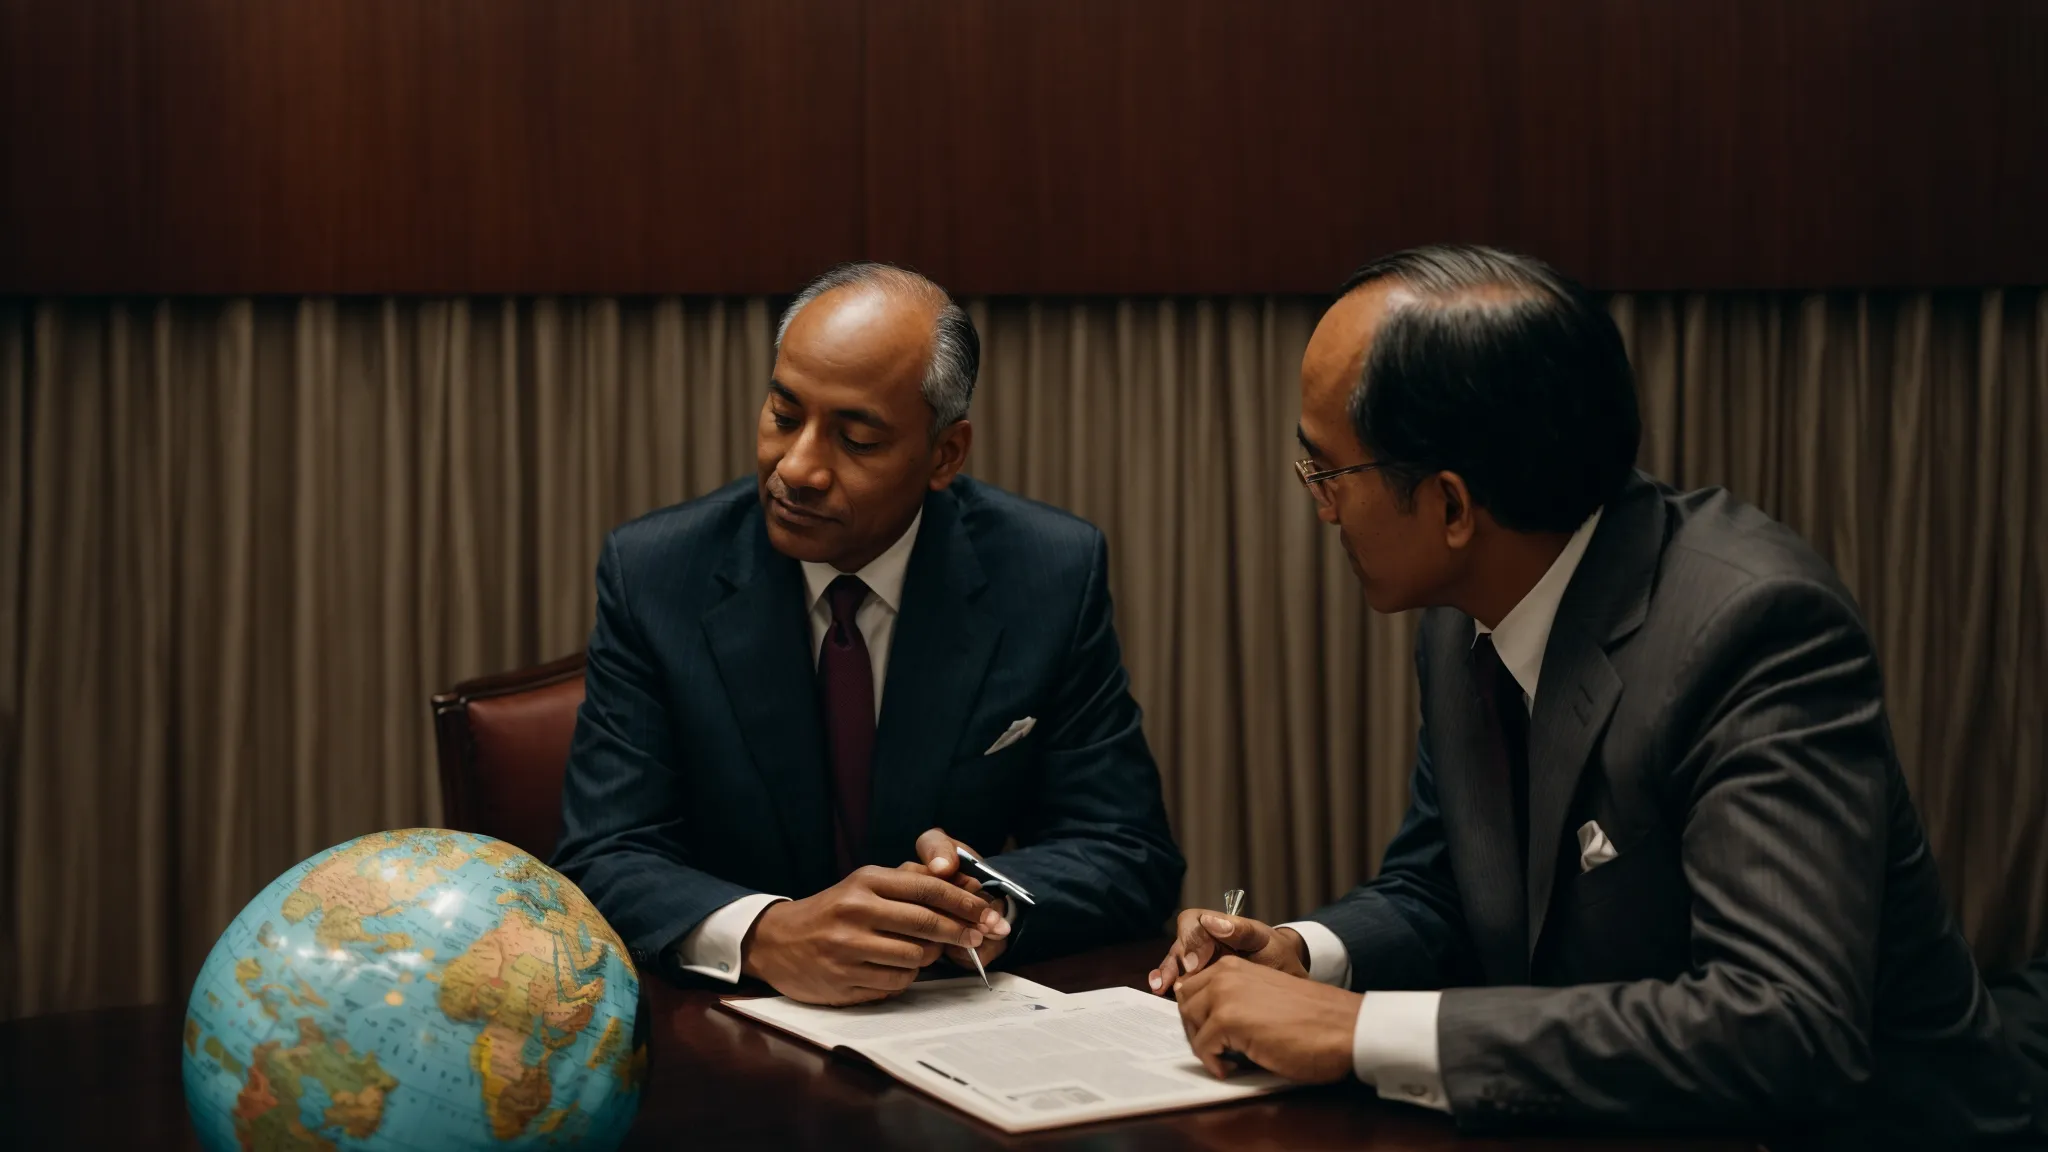 two diplomats seated at a table engaged in a serious discussion with a globe between them.